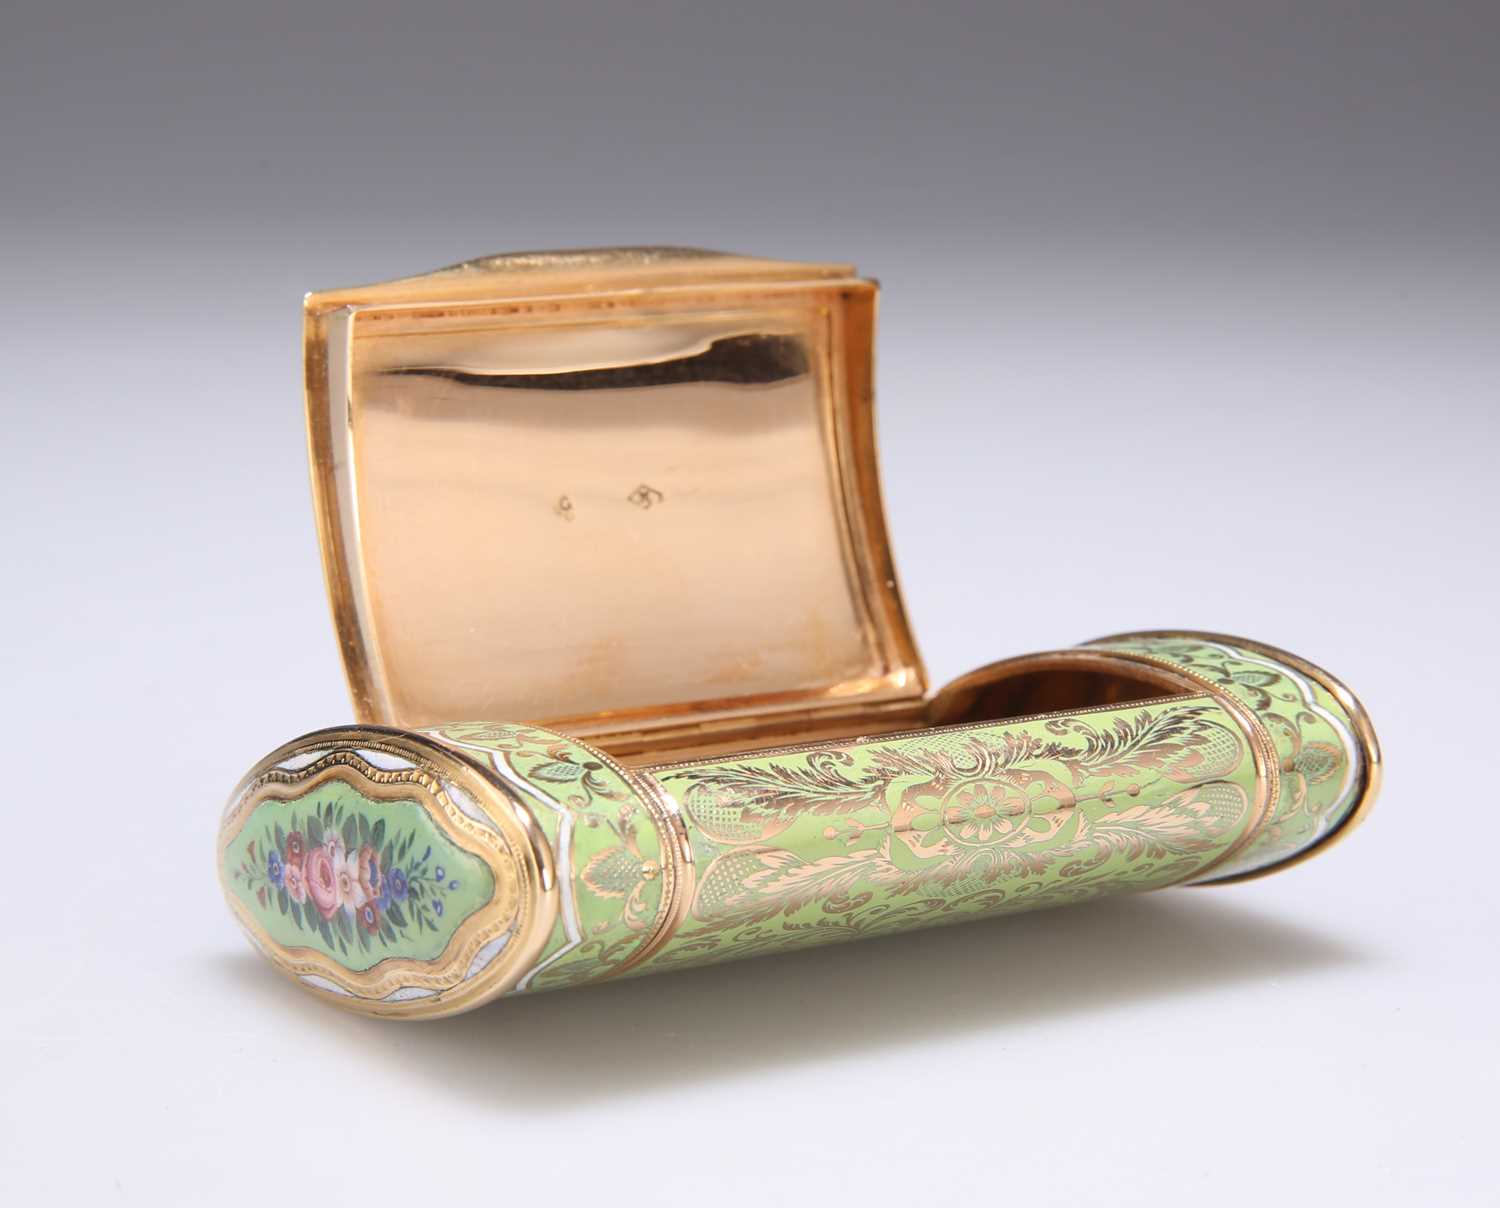 A FINE GOLD AND ENAMEL SNUFF BOX FOR THE TURKISH MARKET by Moulinié Bautte & Cie, Geneva, circa 1810 - Image 3 of 4